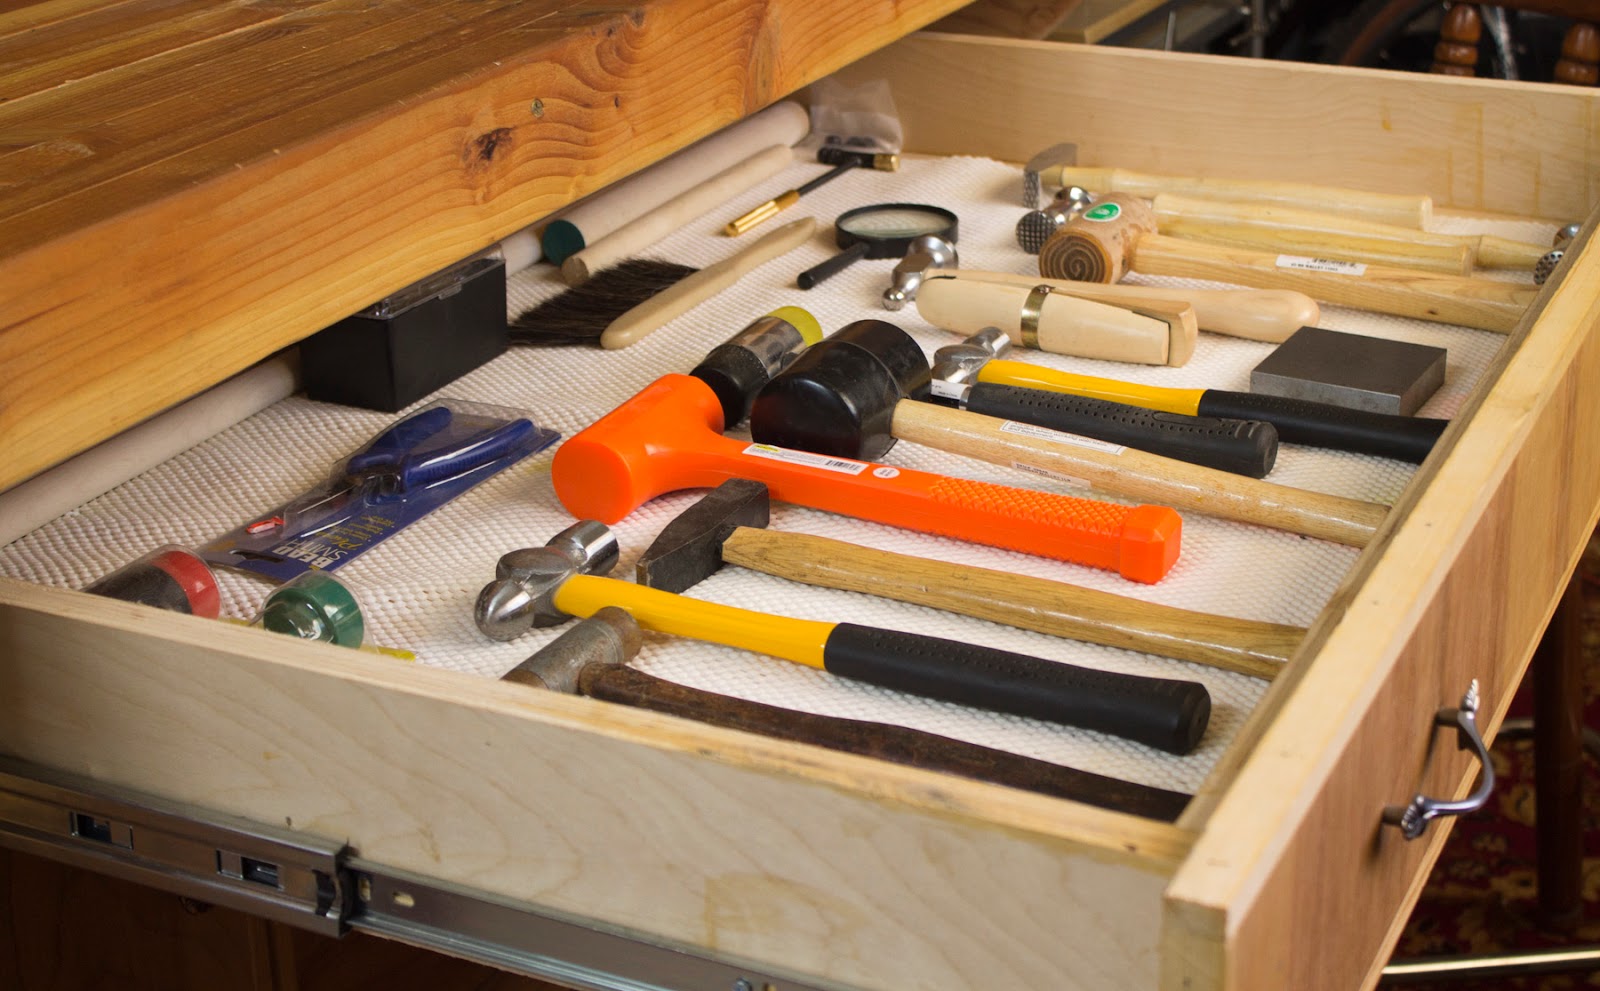 Workbench with Drawers